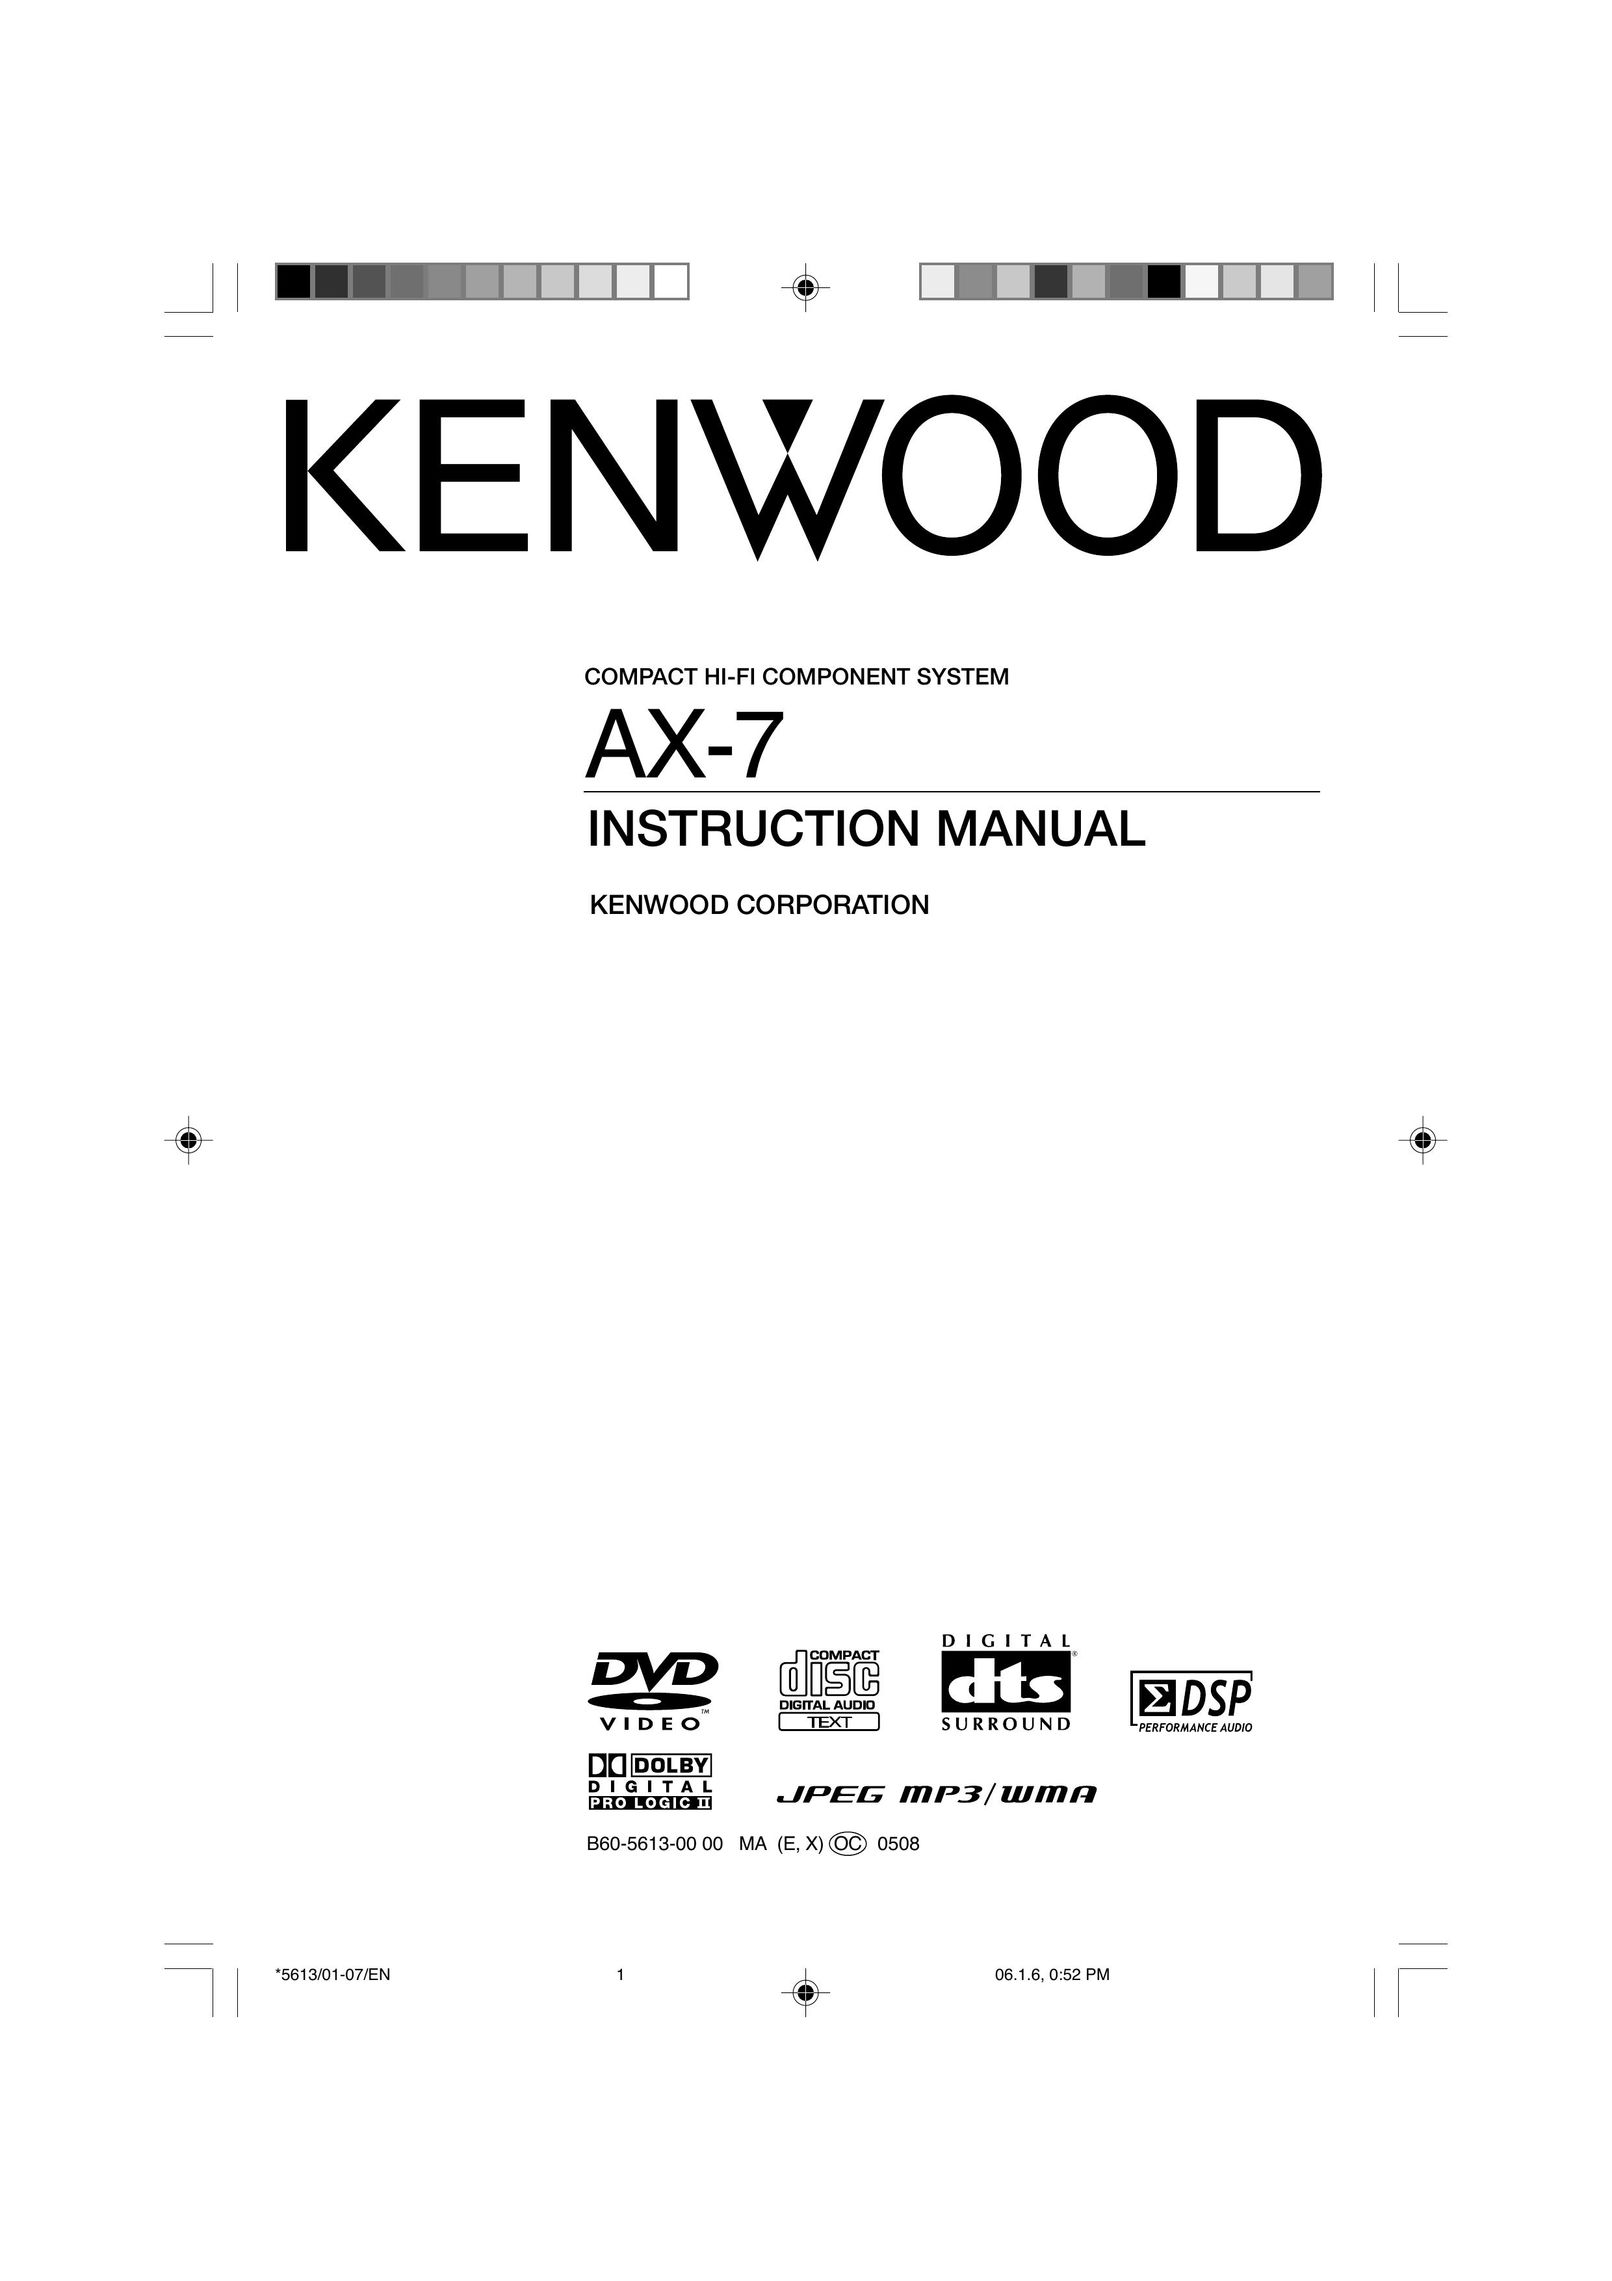 Kenwood AX-7 Stereo System User Manual